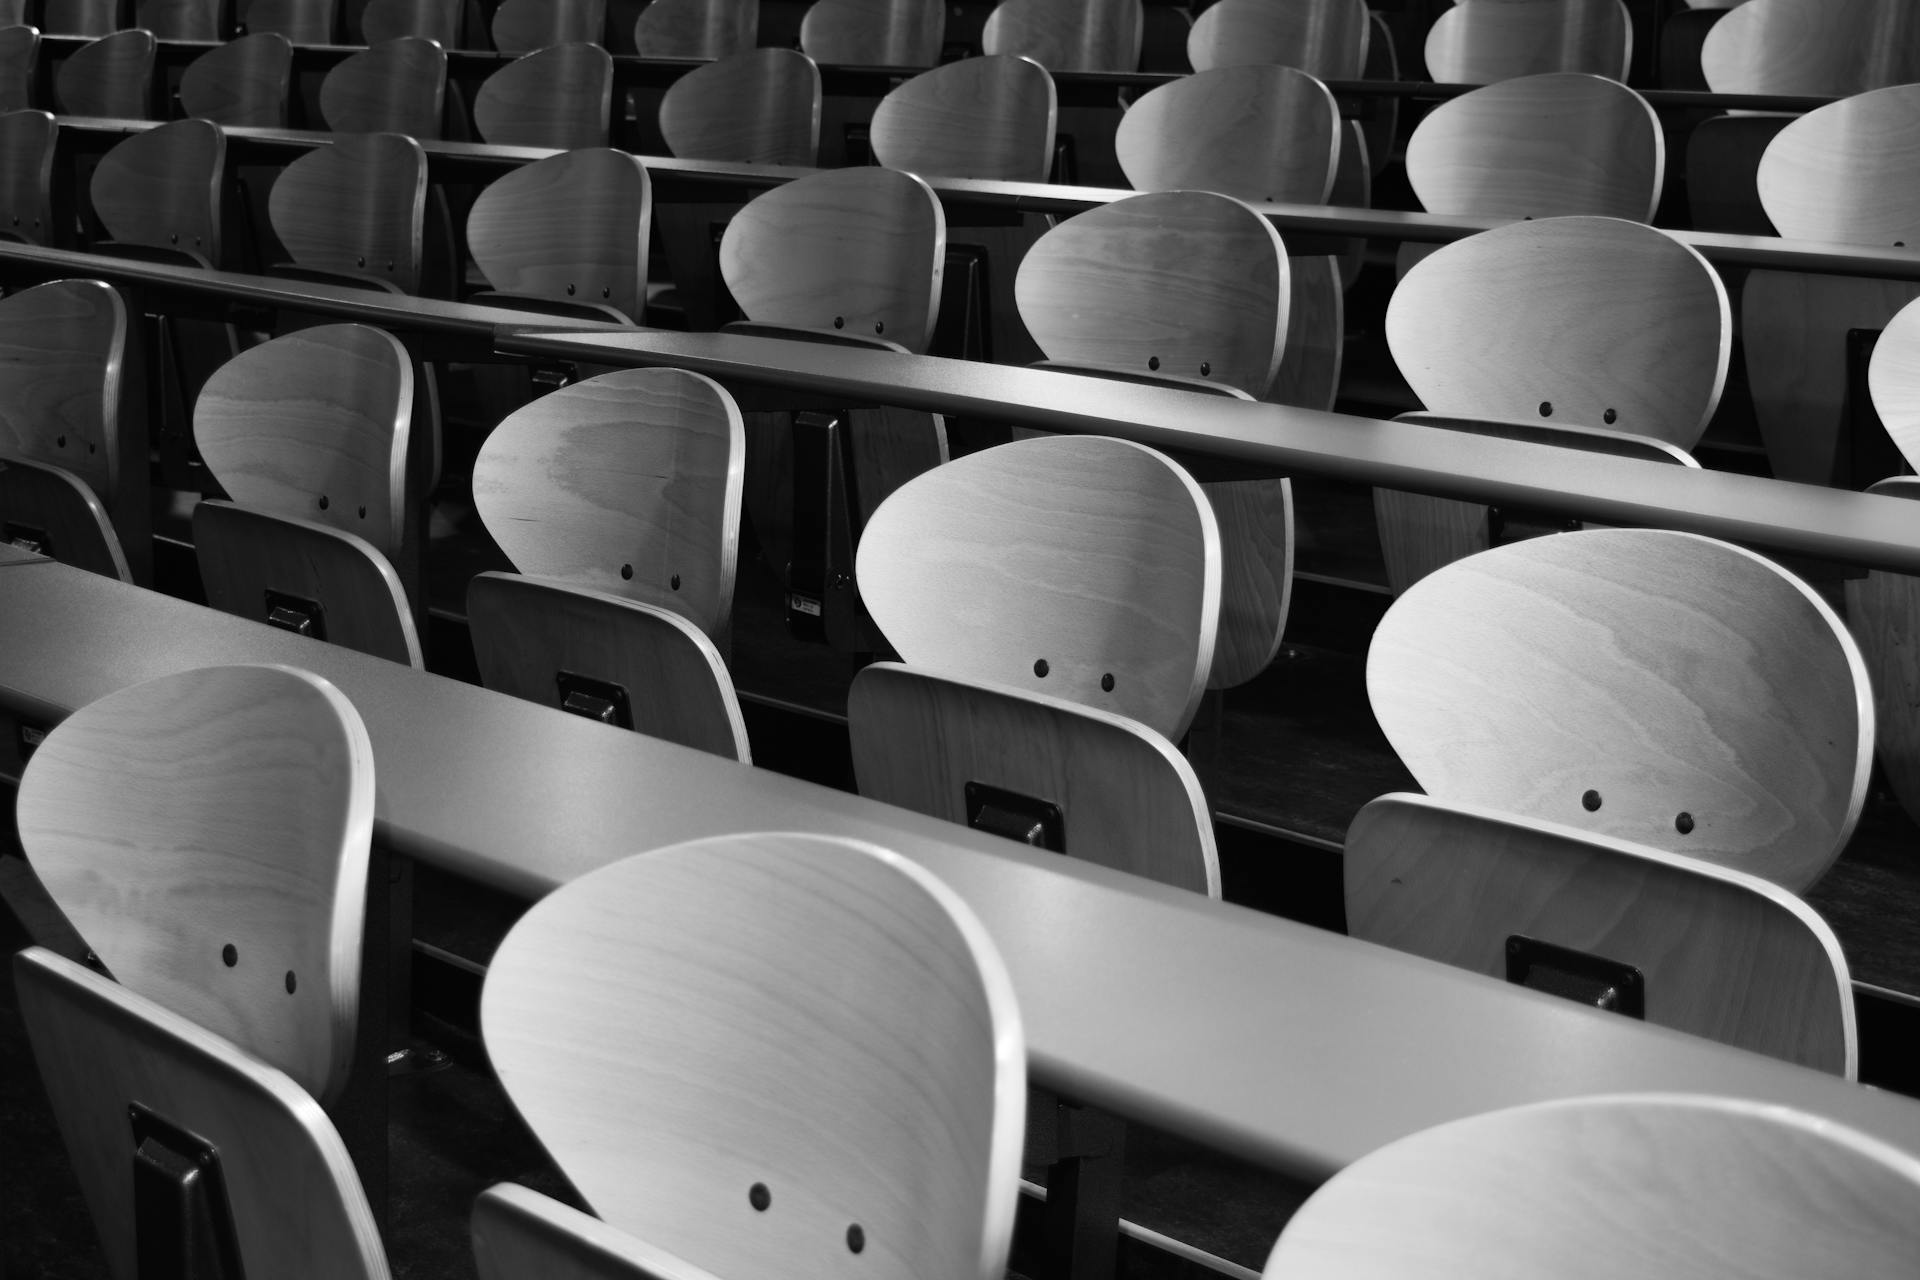 Photo of chairs in a classroom